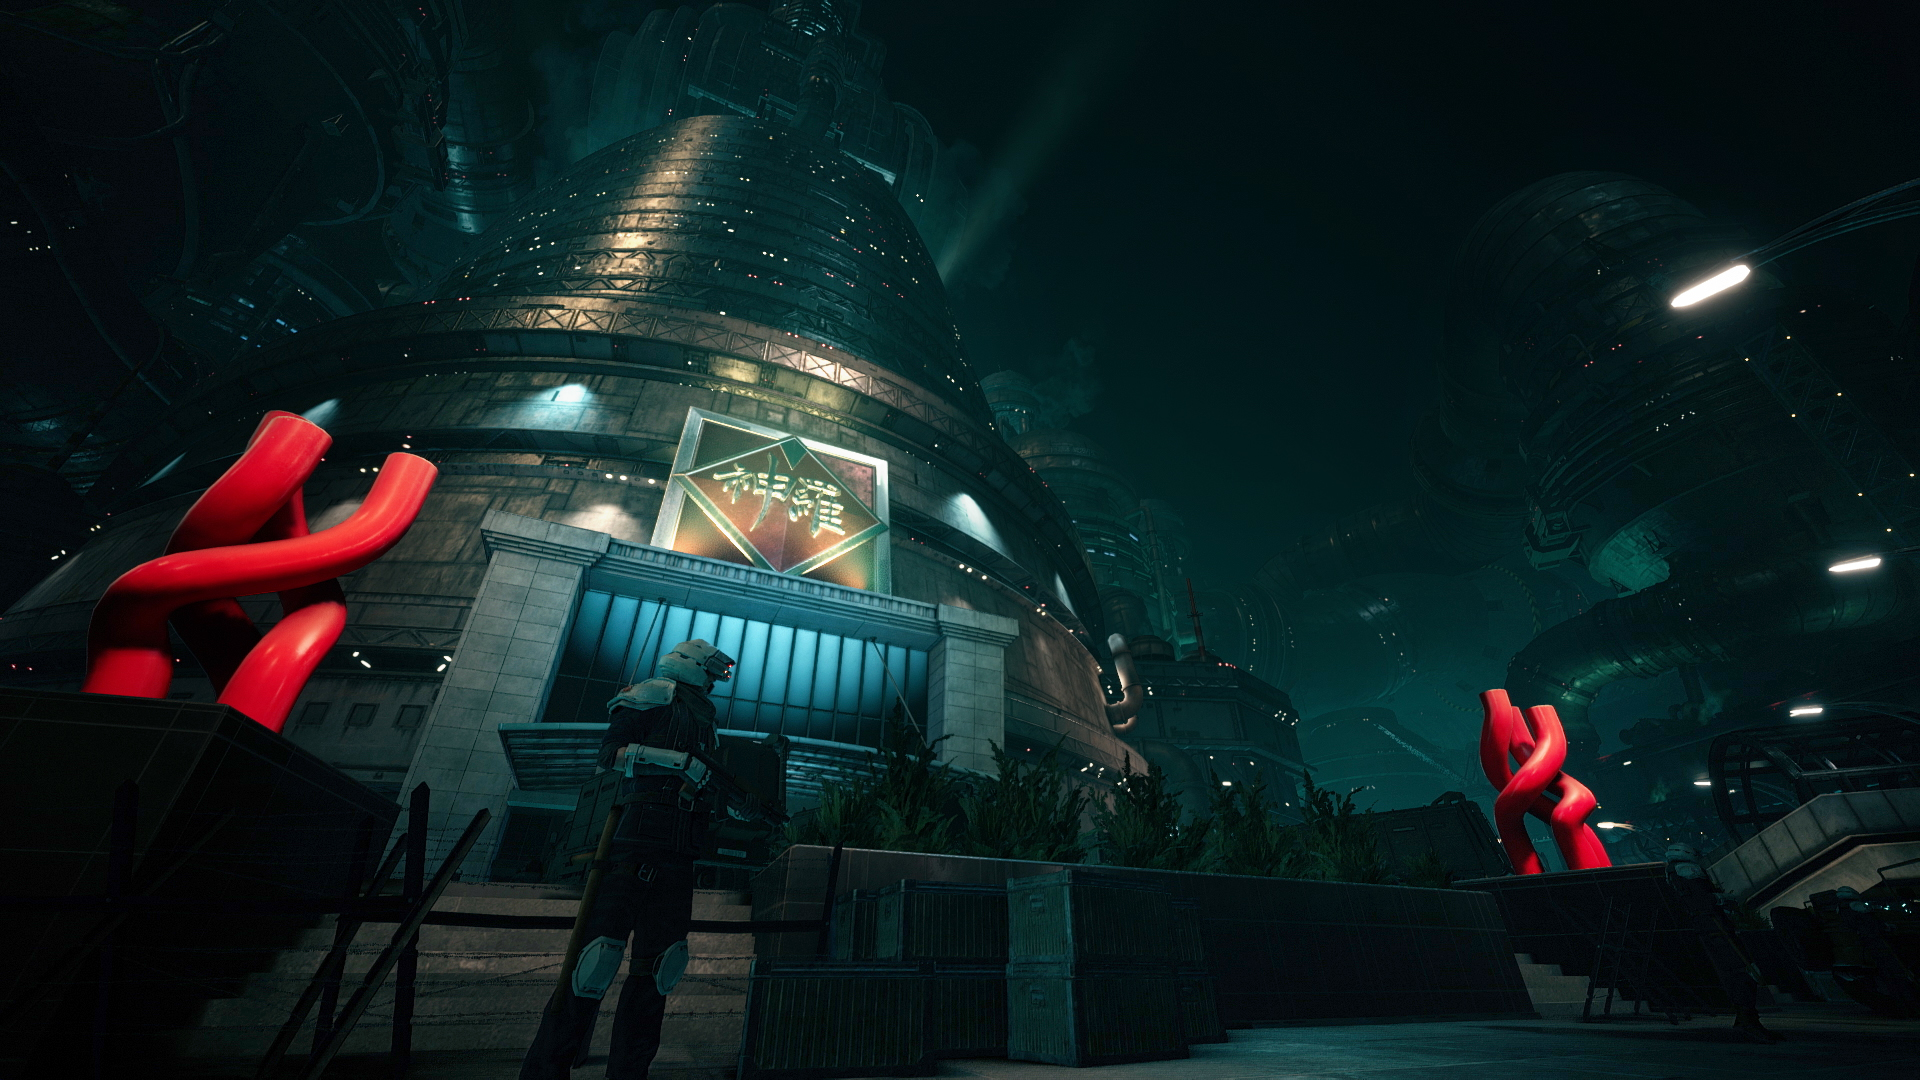 Free Final Fantasy Vii Remake Zoom Backgrounds Available To Download Square Enix Blog